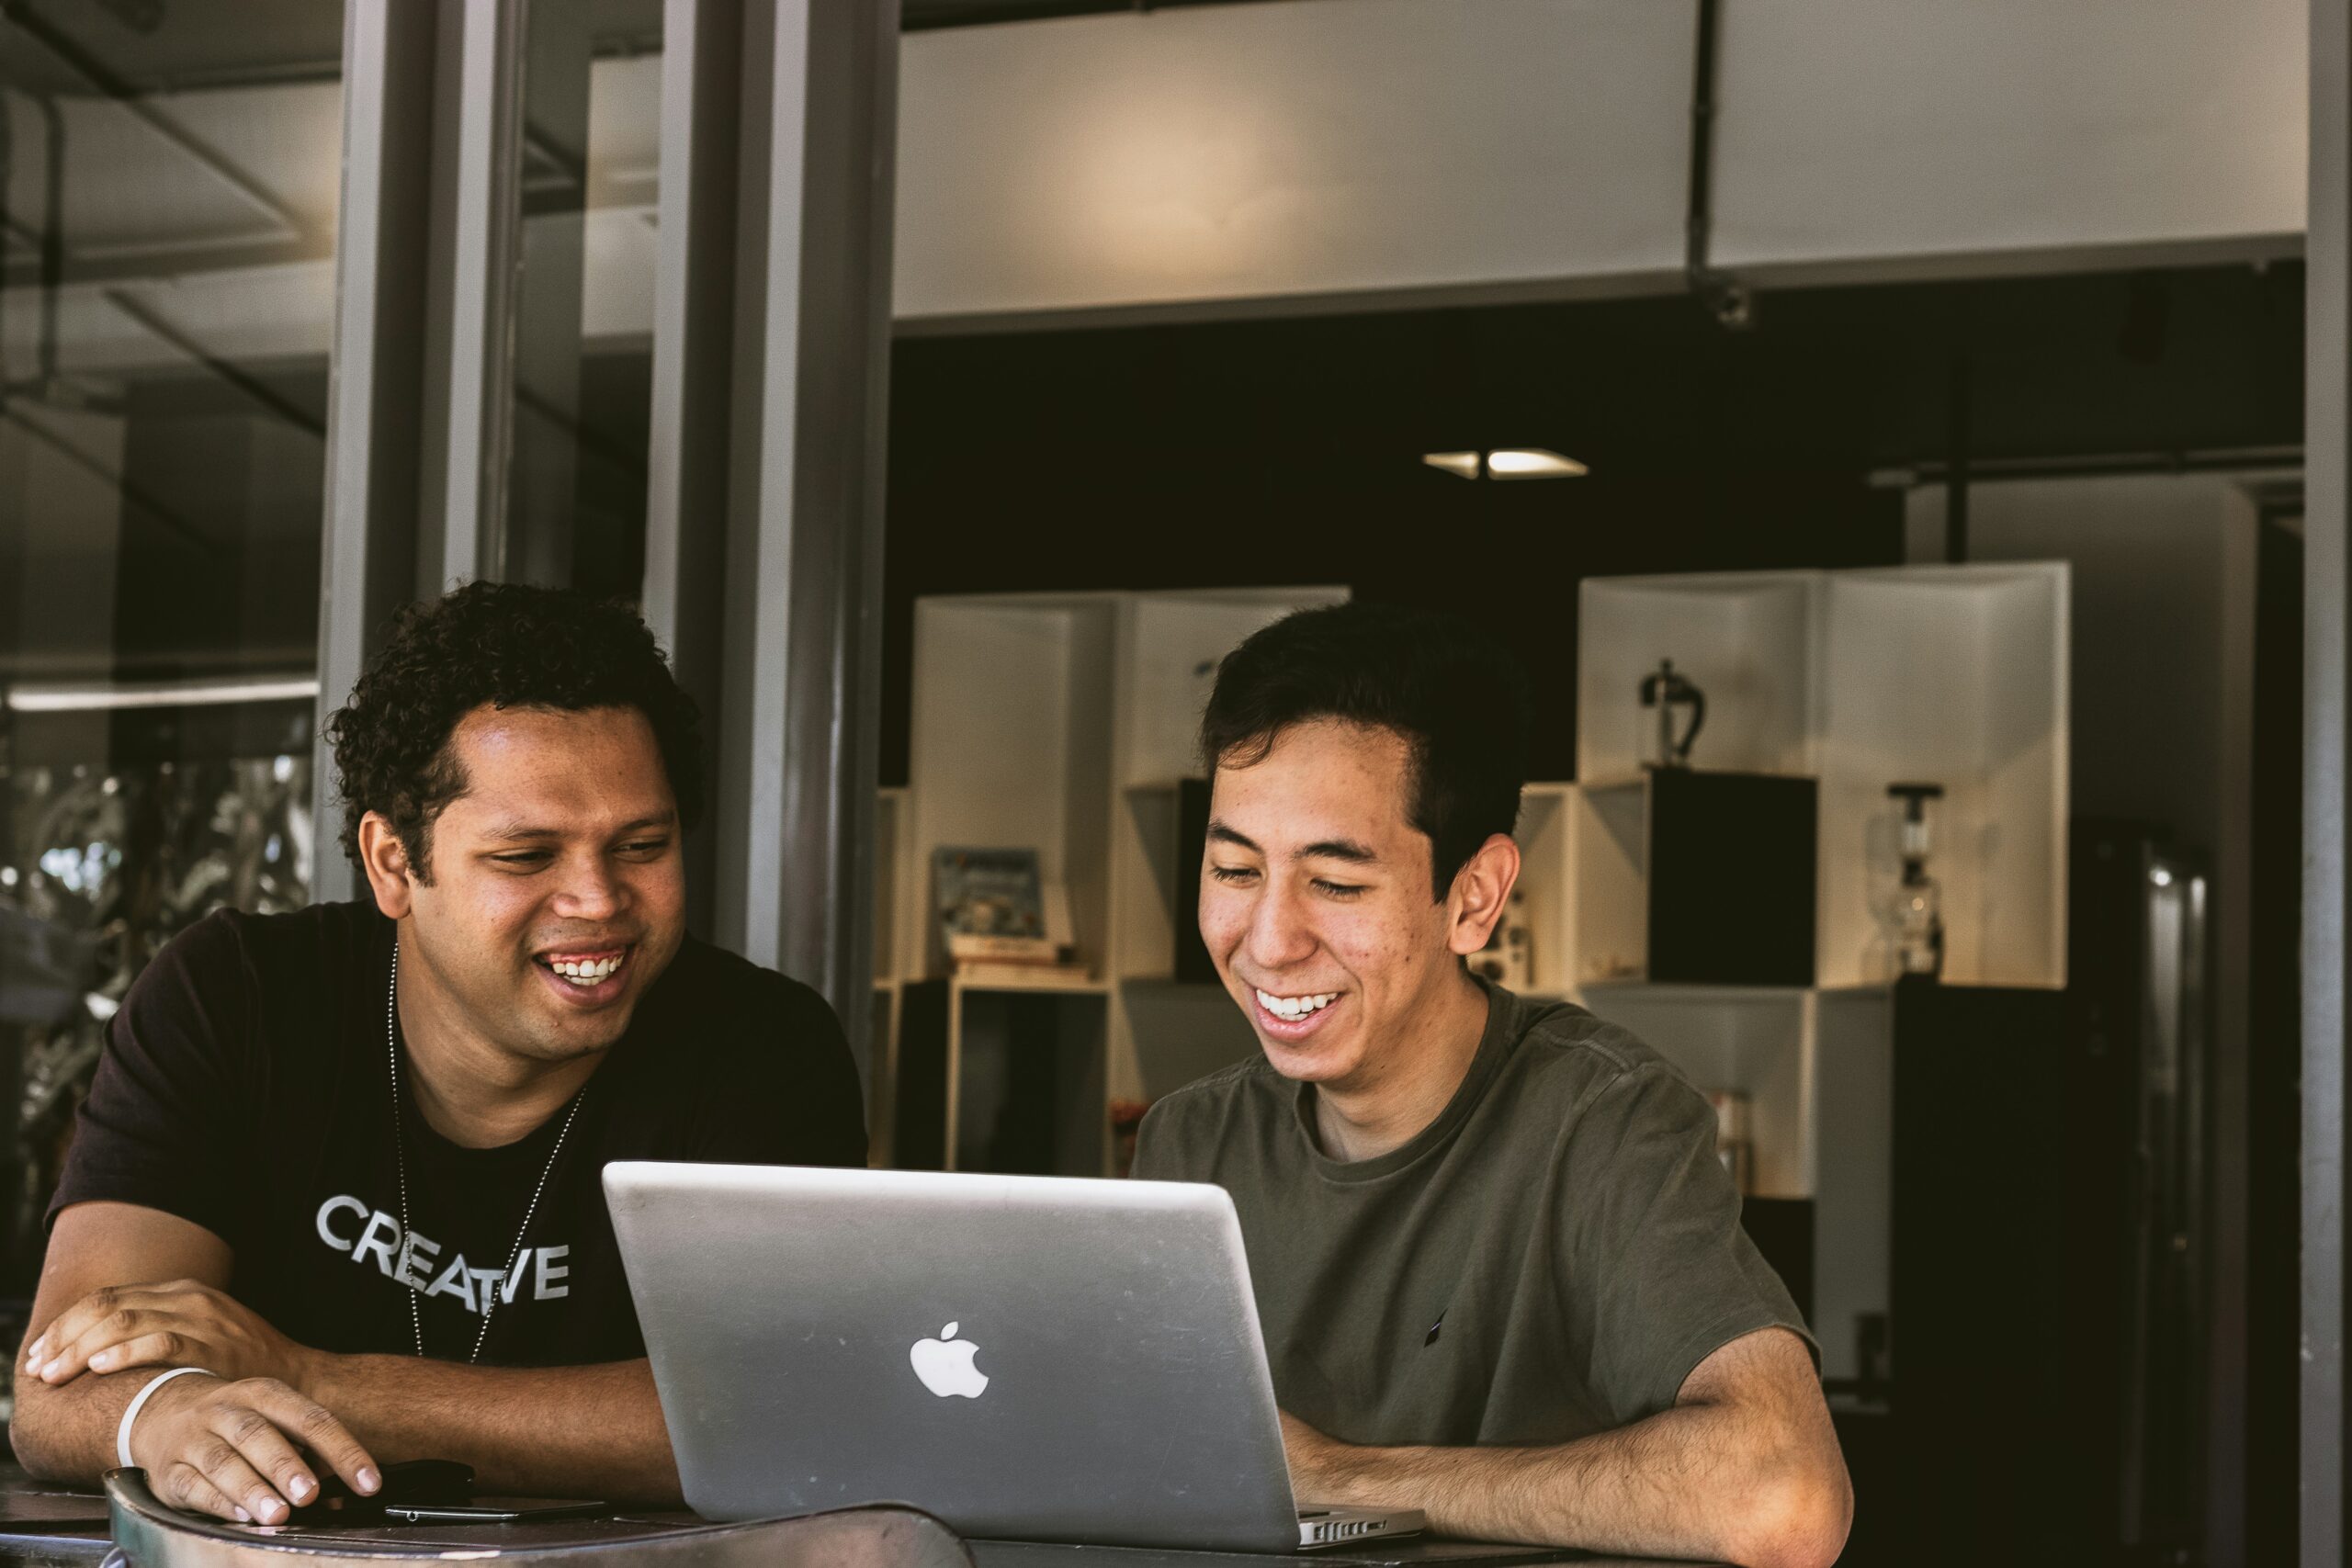 Two men laughing and looking at a laptop screen together, discussing IT service management principles and practices in a modern office setting.